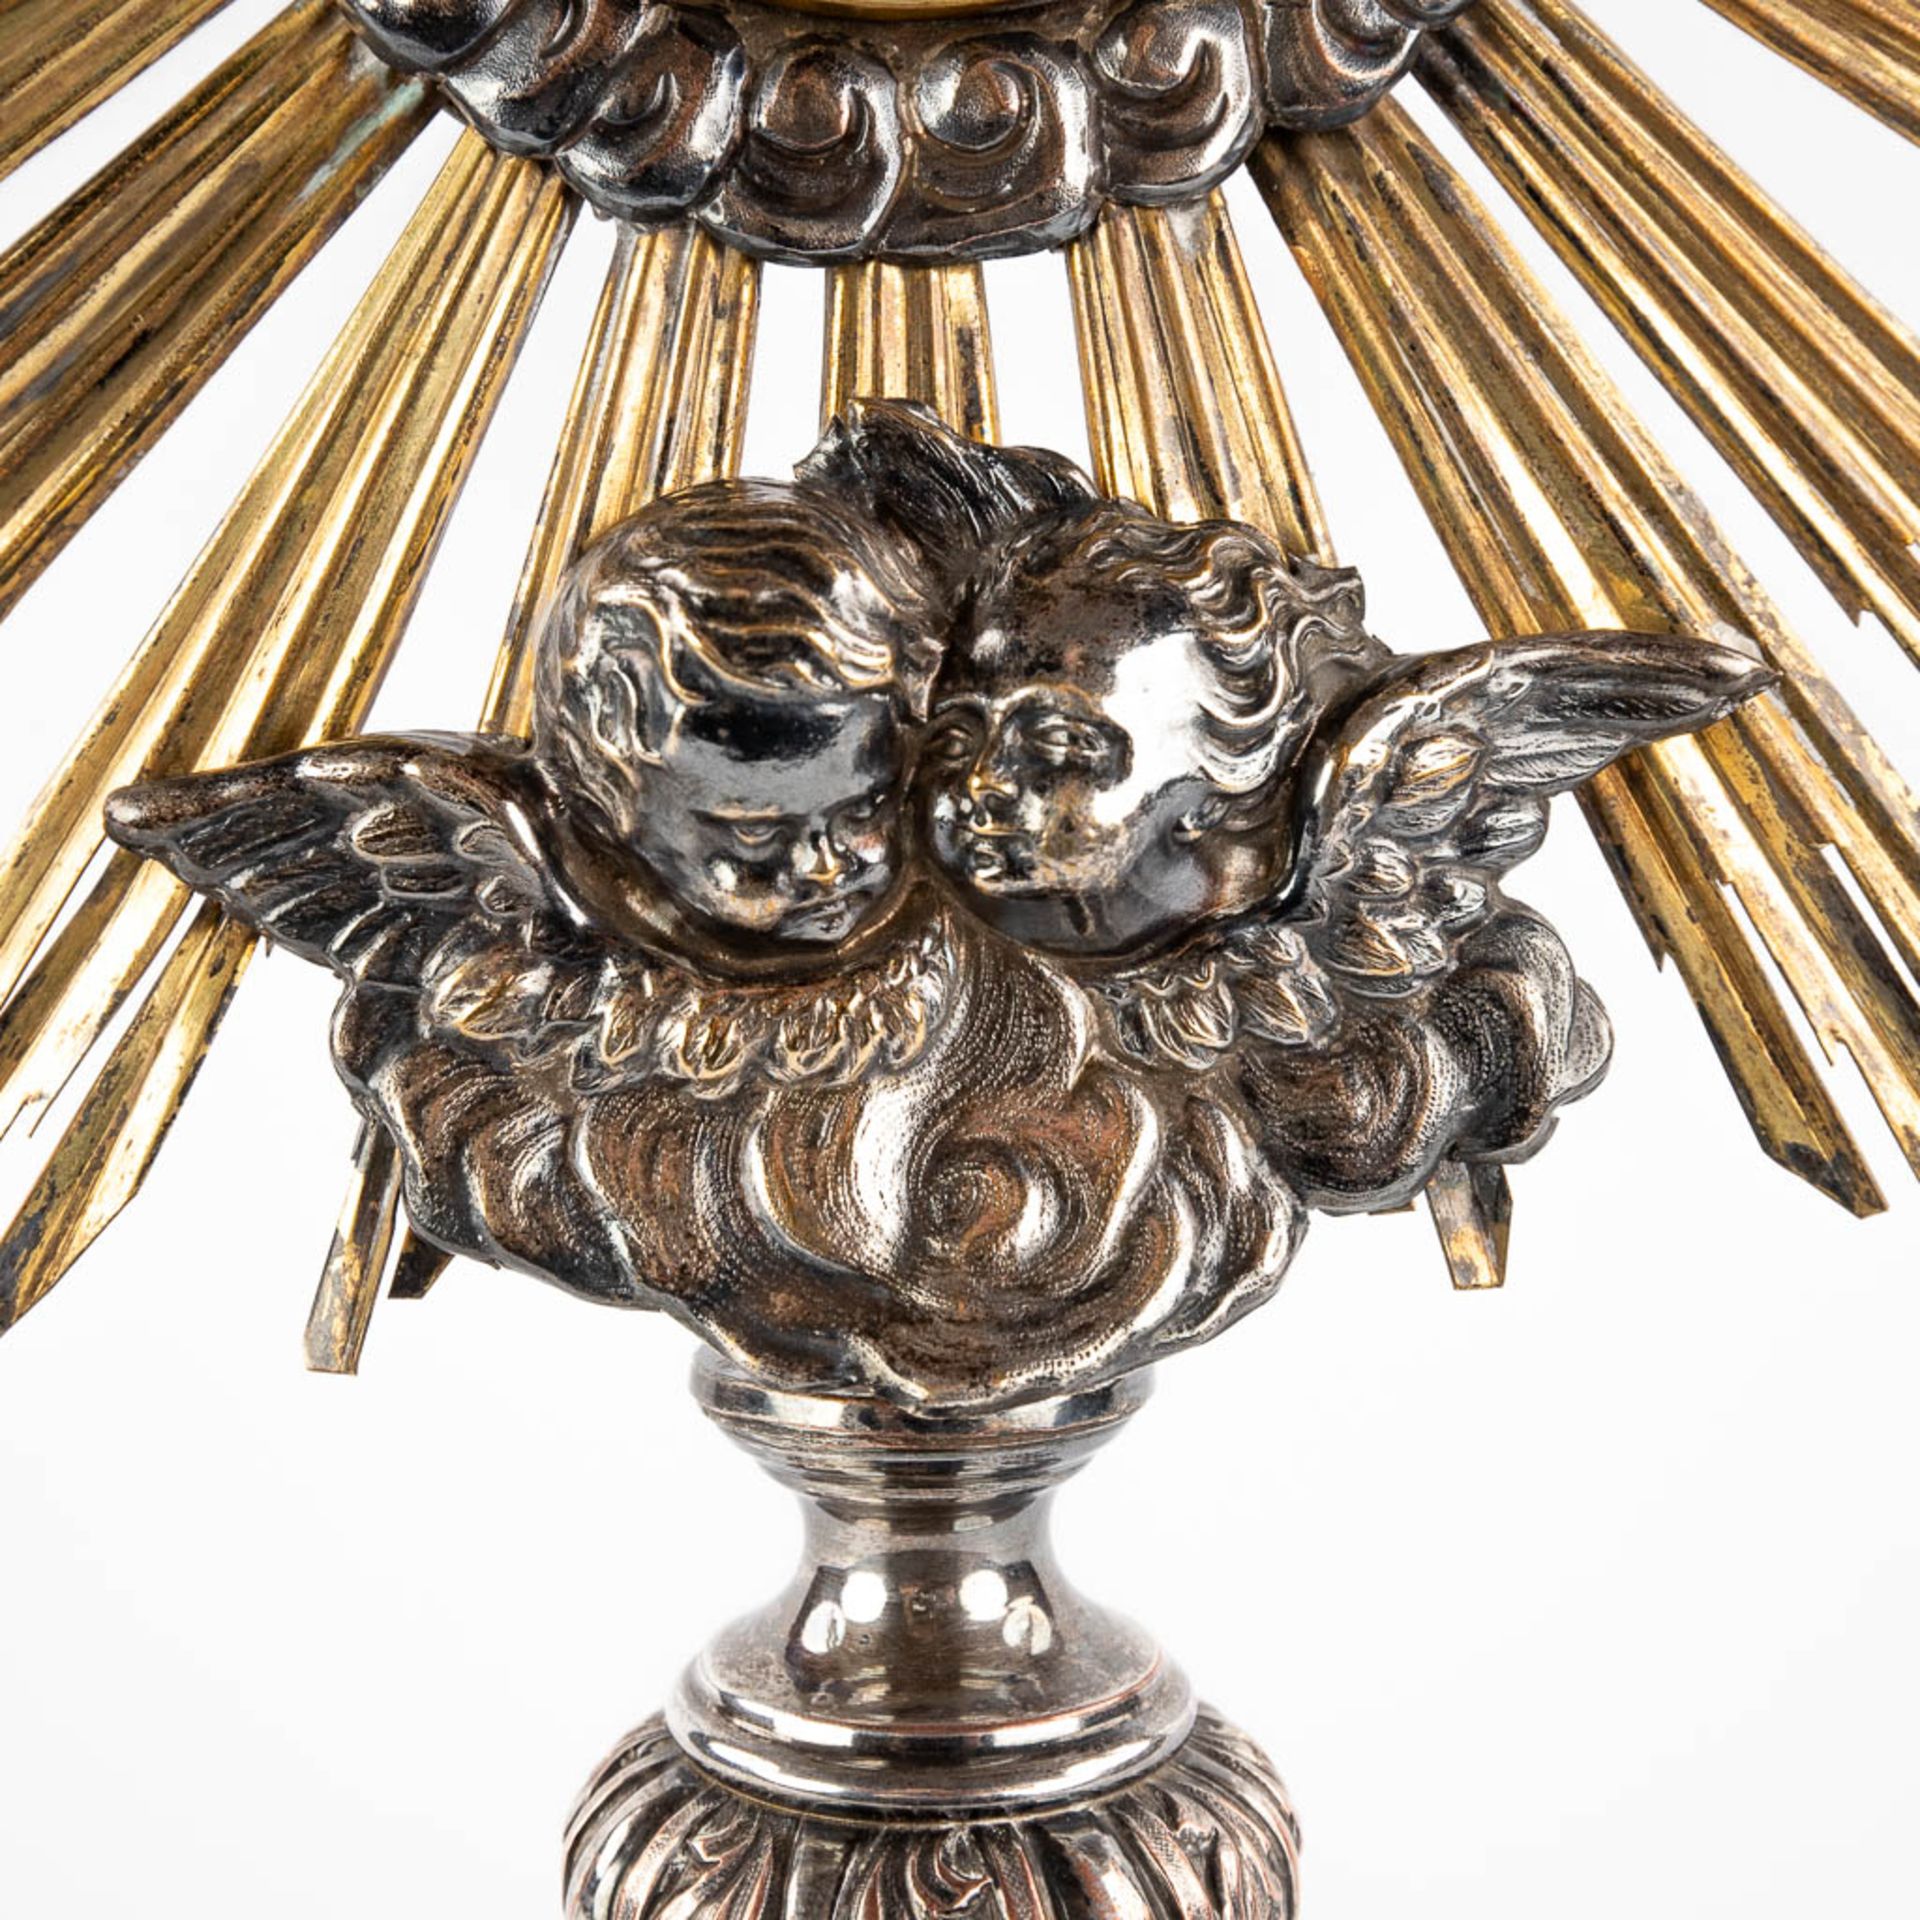 A sunburst monstrance, silver-plated metal and brass. Circa 1900. (D:15 x W:29 x H:57 cm) - Image 12 of 14